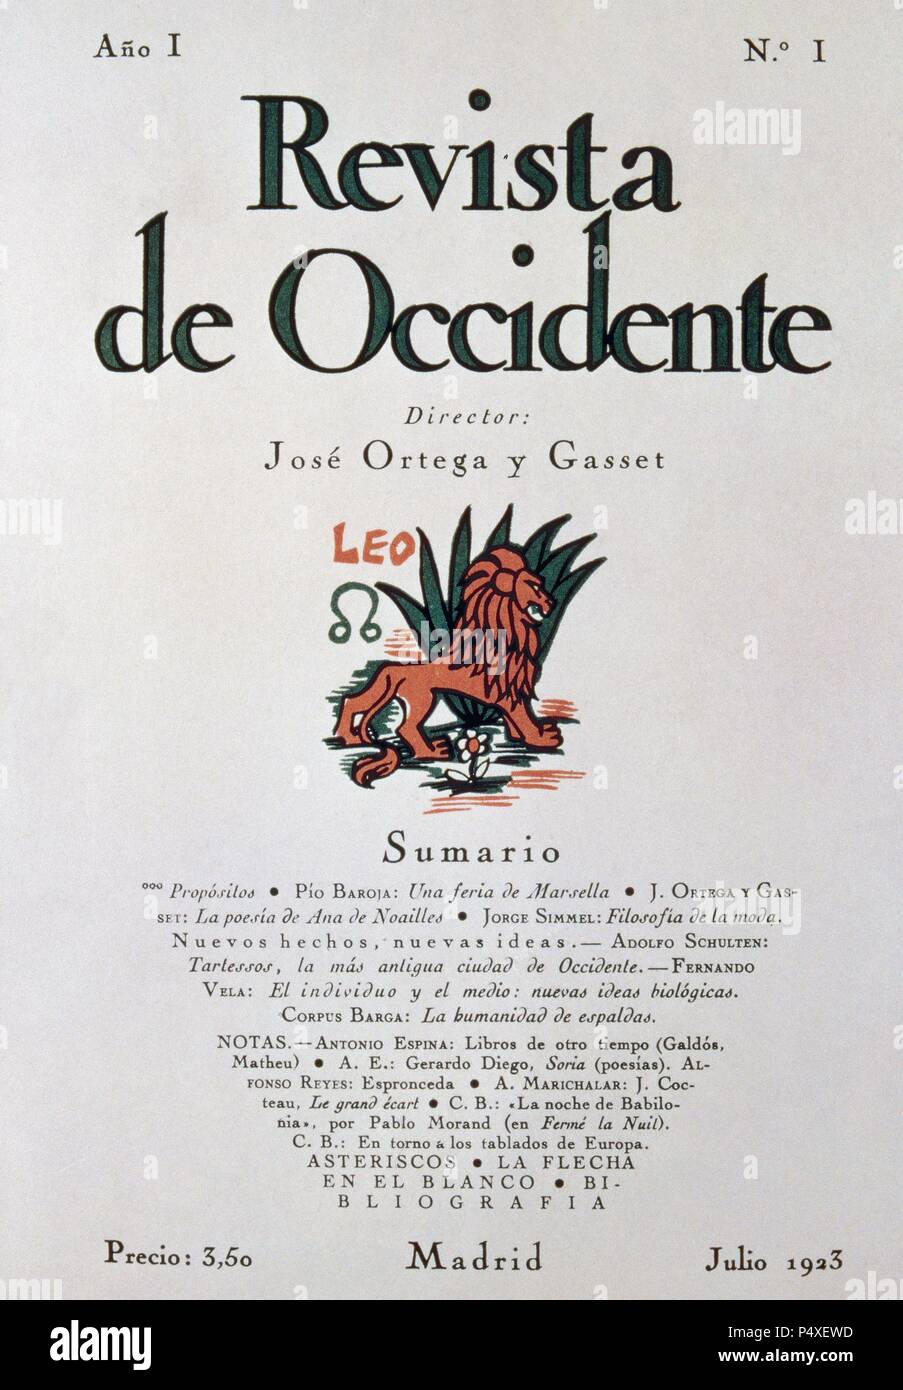 Revista de Occidente. Year 1. Number 1. Directed by Jose Ortega y Gasset. July, 1923. Madrid. Spain. Stock Photo